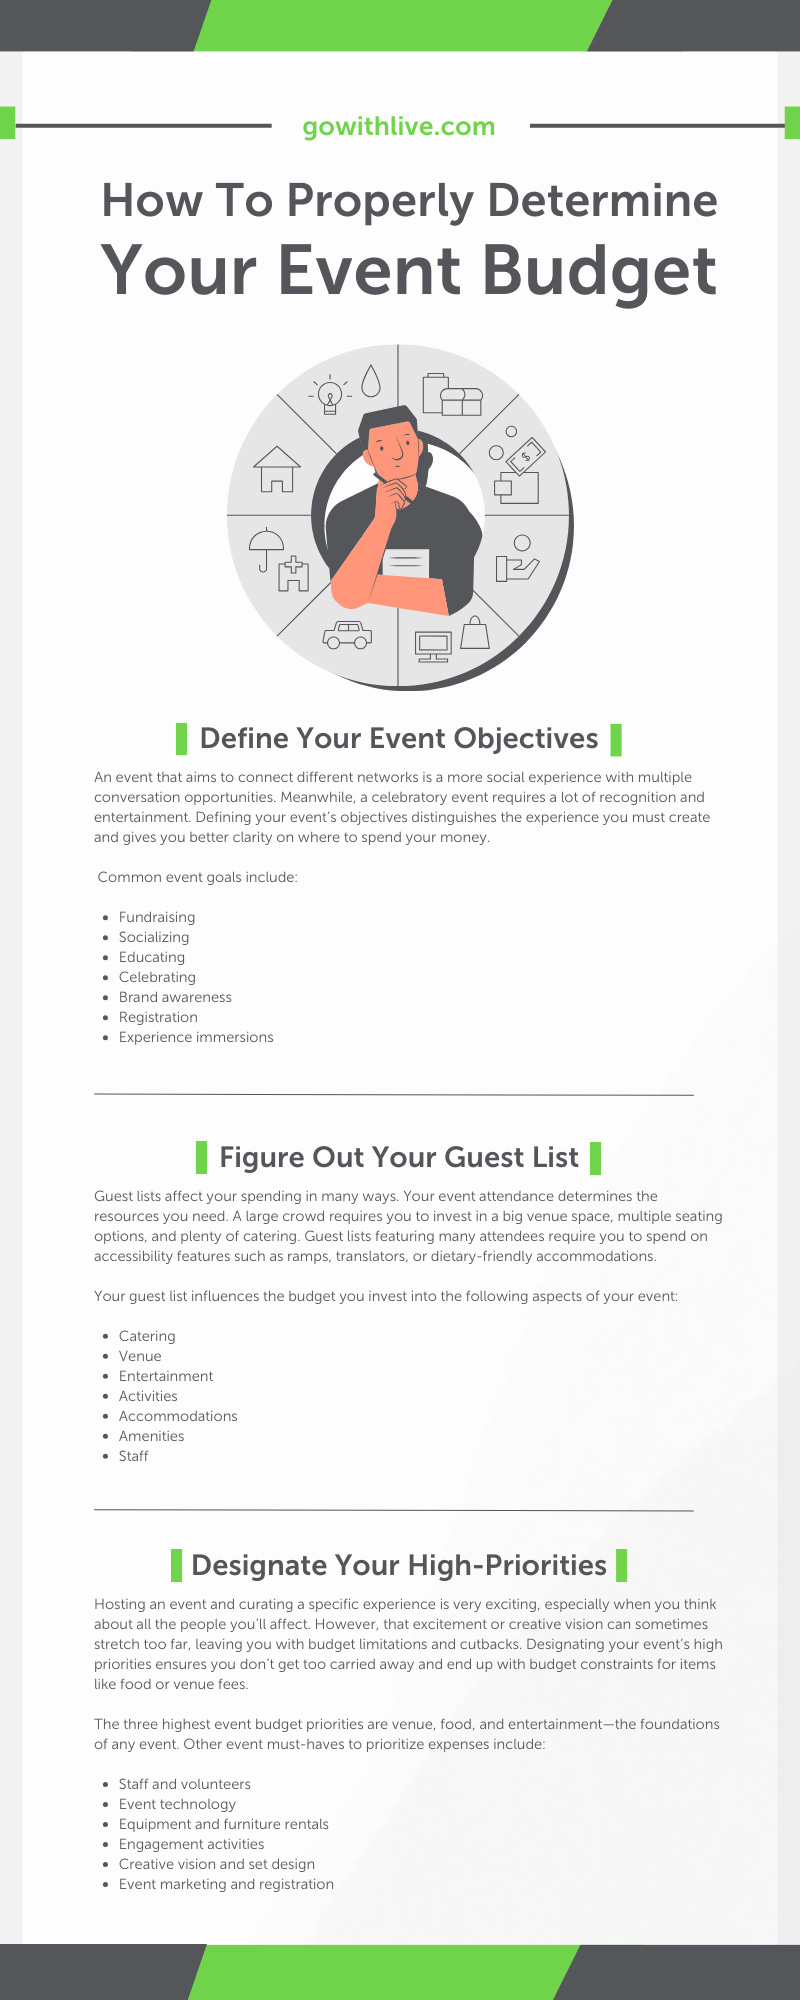 How To Properly Determine Your Event Budget 